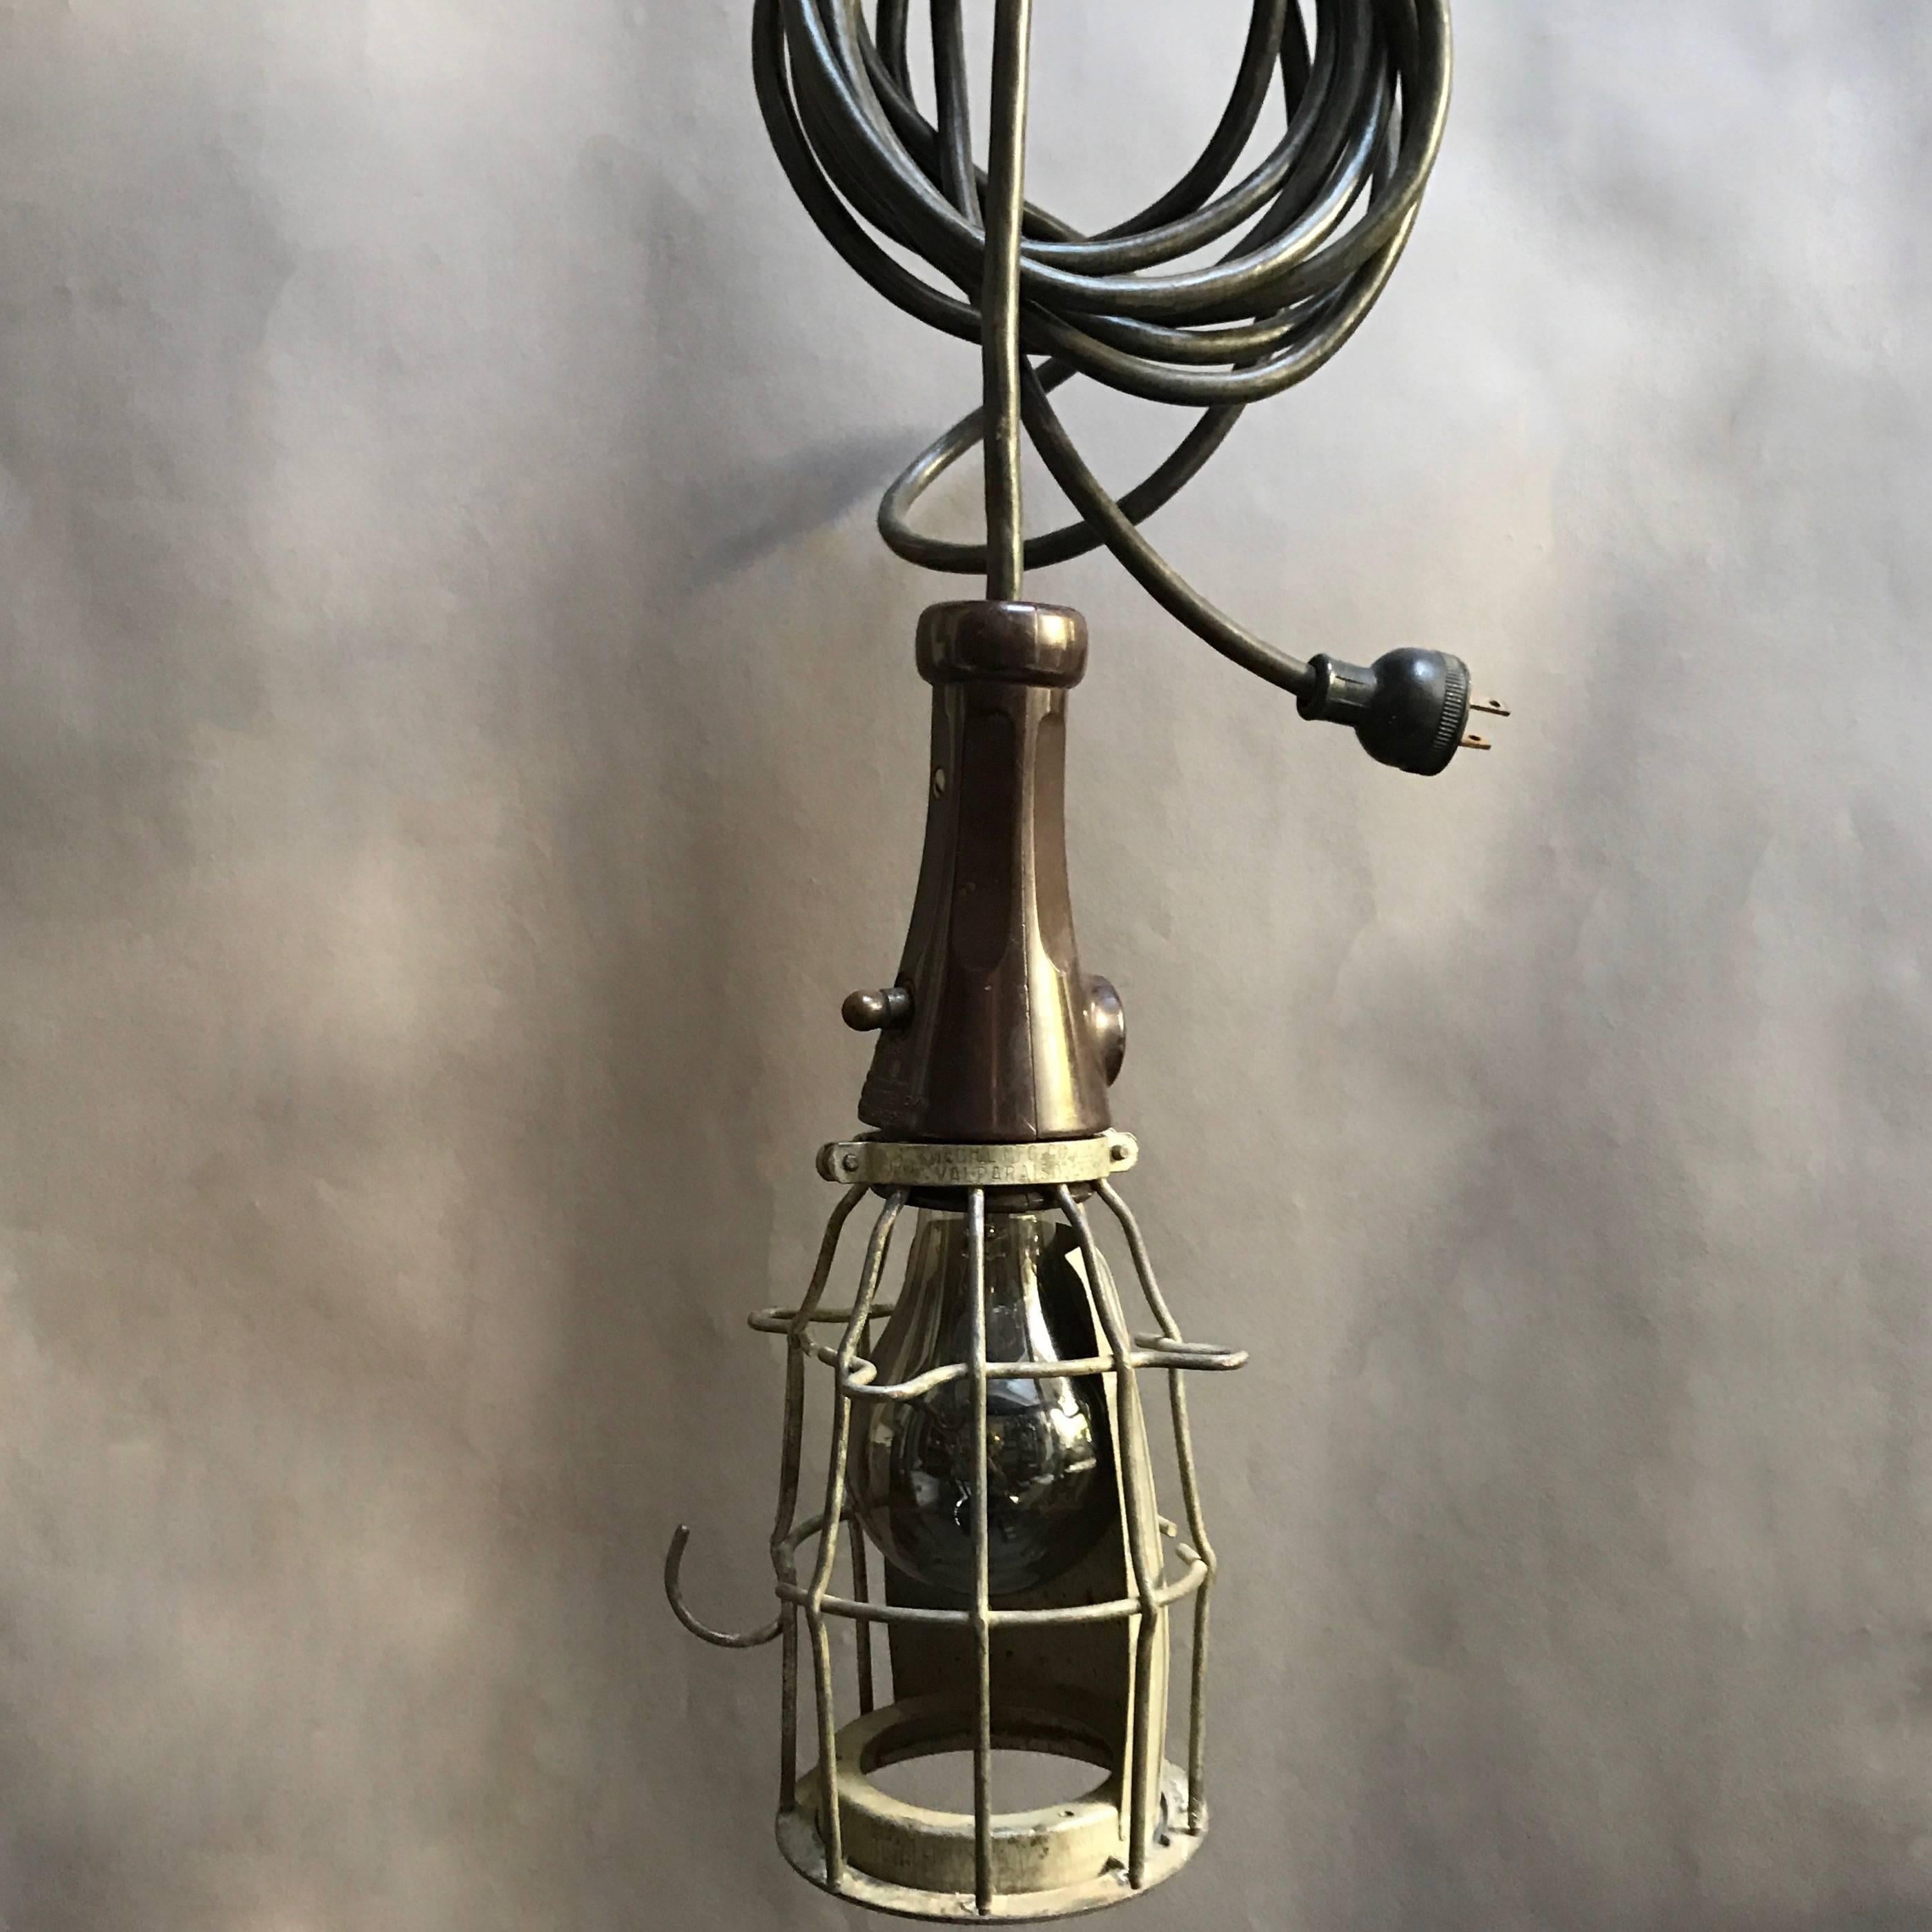 1950s, Industrial, utility, cage light features a hooked steel cage and rubber handle with power switch and can be used as a hanging pendant light or wall sconce. Wired for up to a 200 watt bulb with 18ft of black Industrial cord.